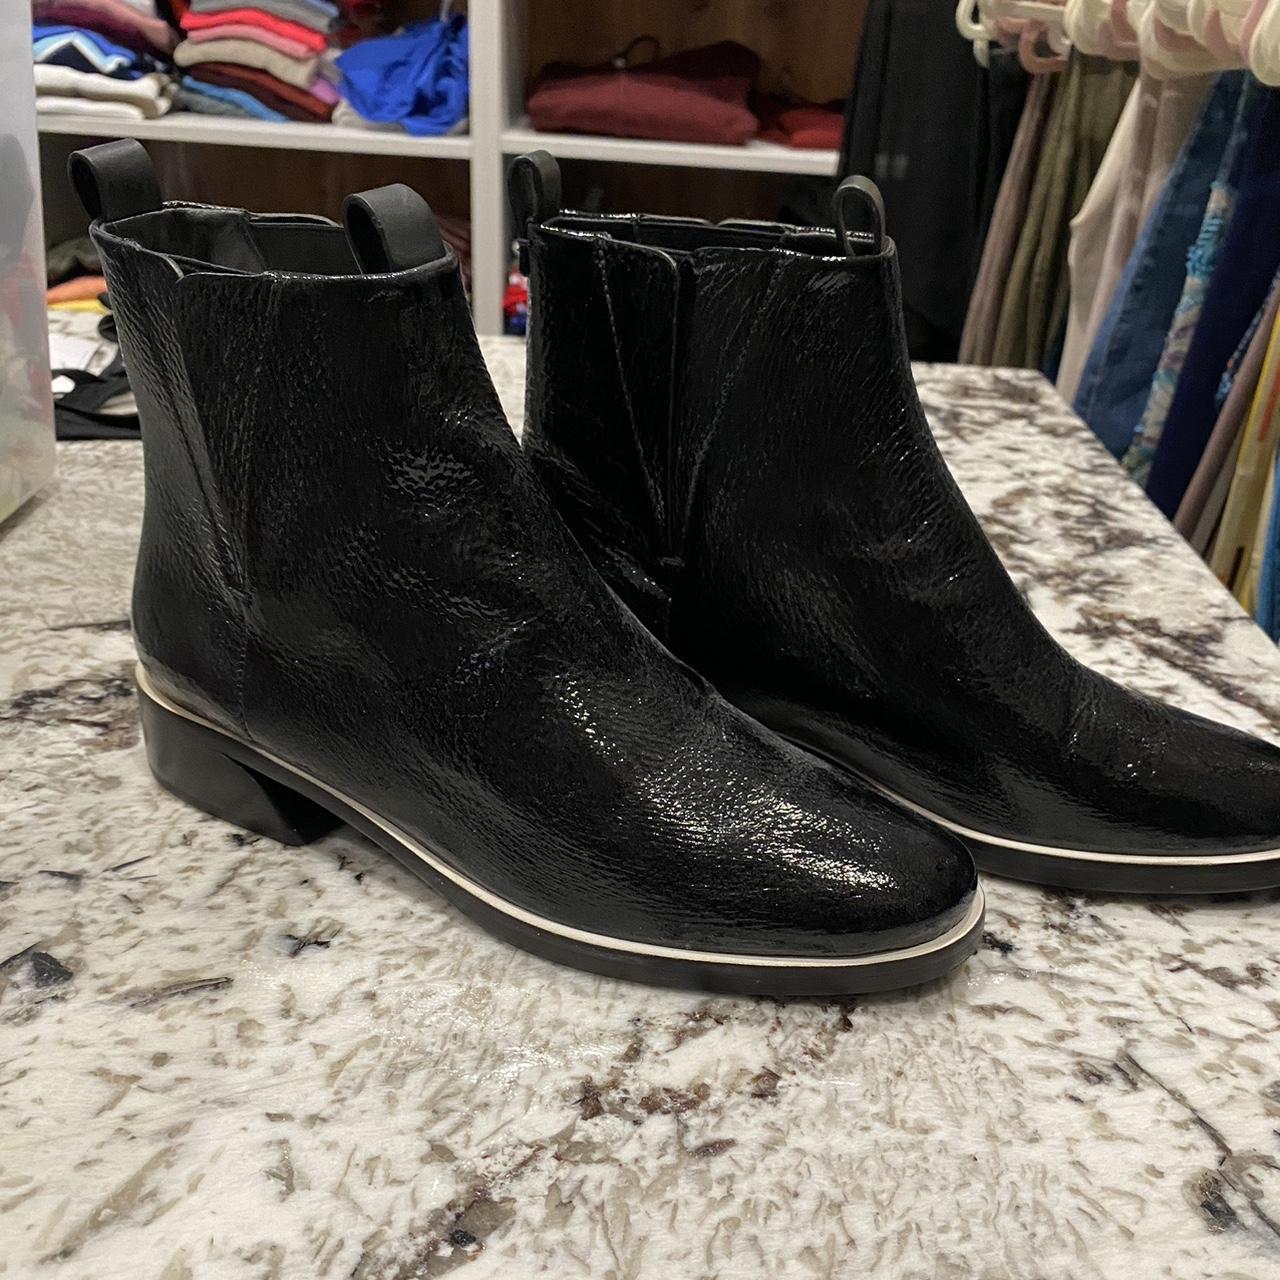 Black faux leather boots size 9 like new - worn... - Depop